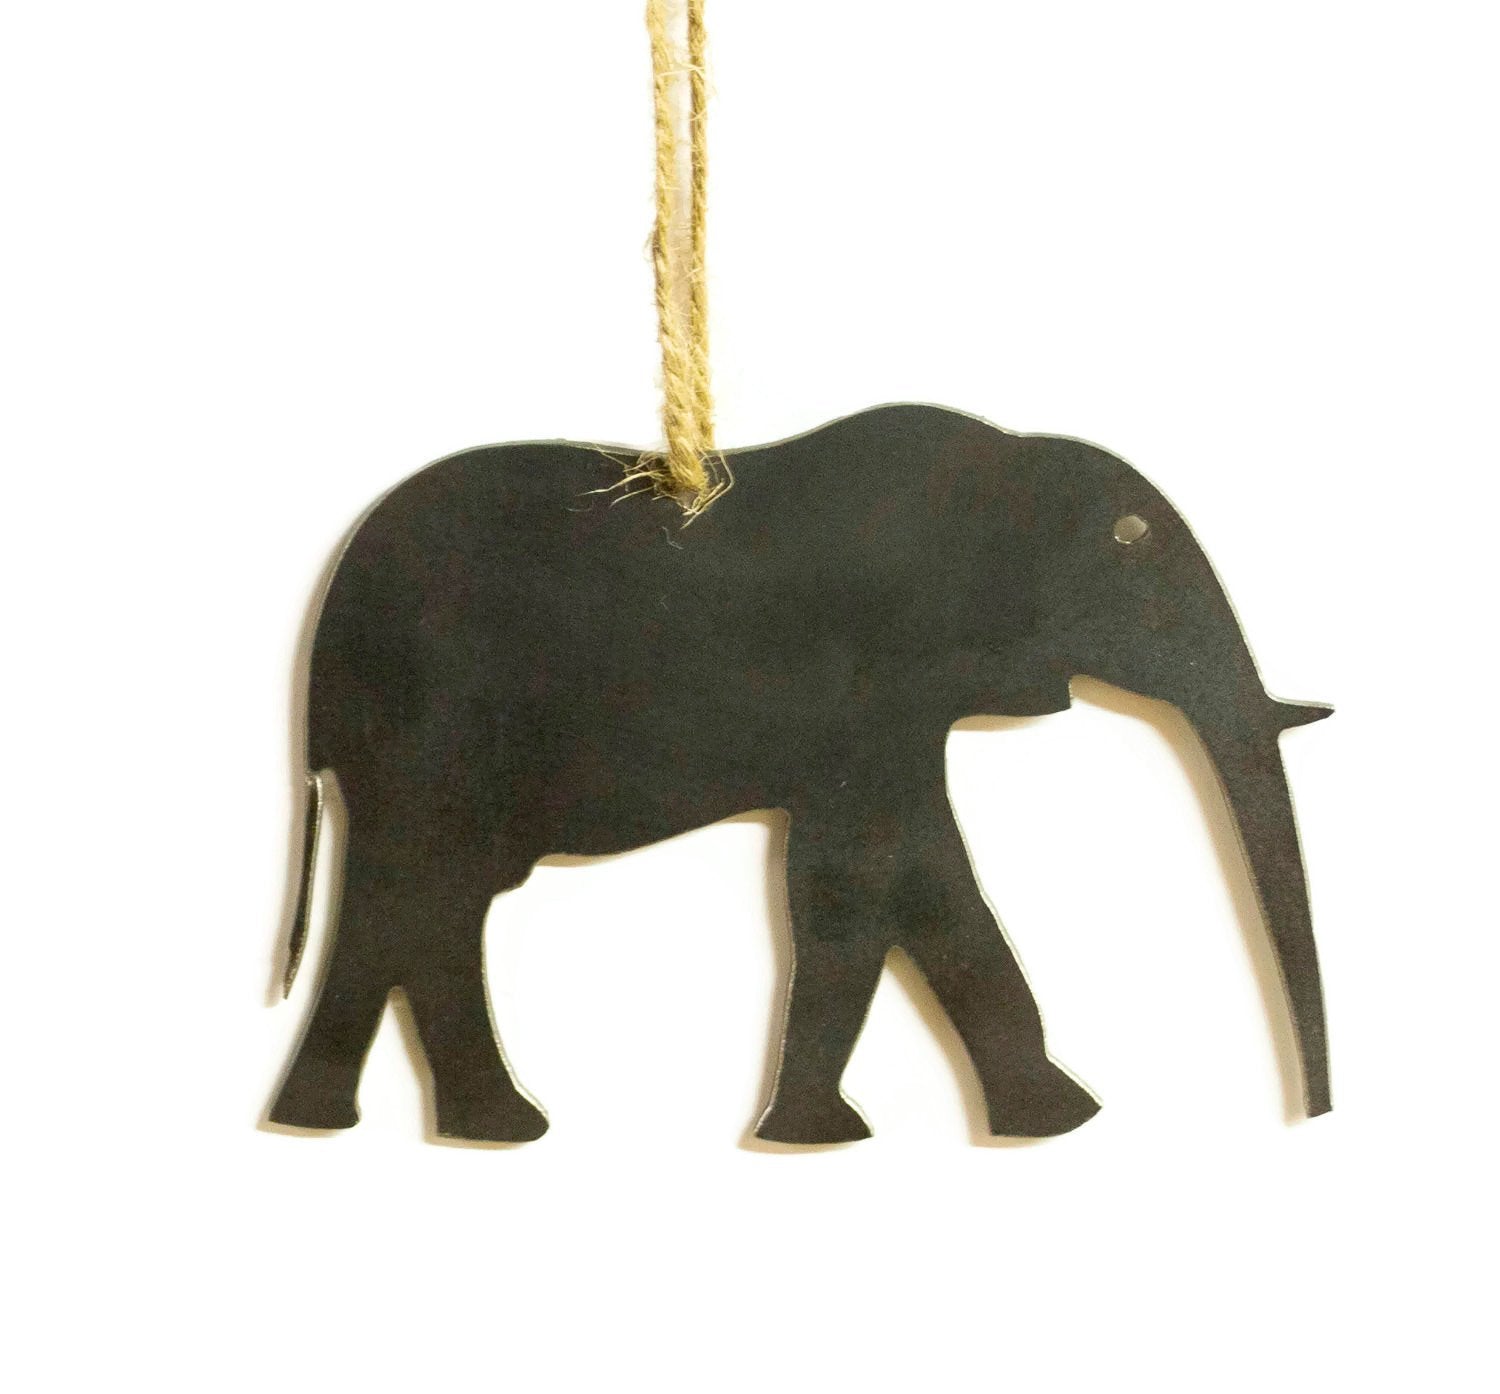 Elephant Metal Christmas Ornament Tree Stocking Stuffer Party Favor Holiday Decoration Raw Steel Gift Recycled Nature Home Decor